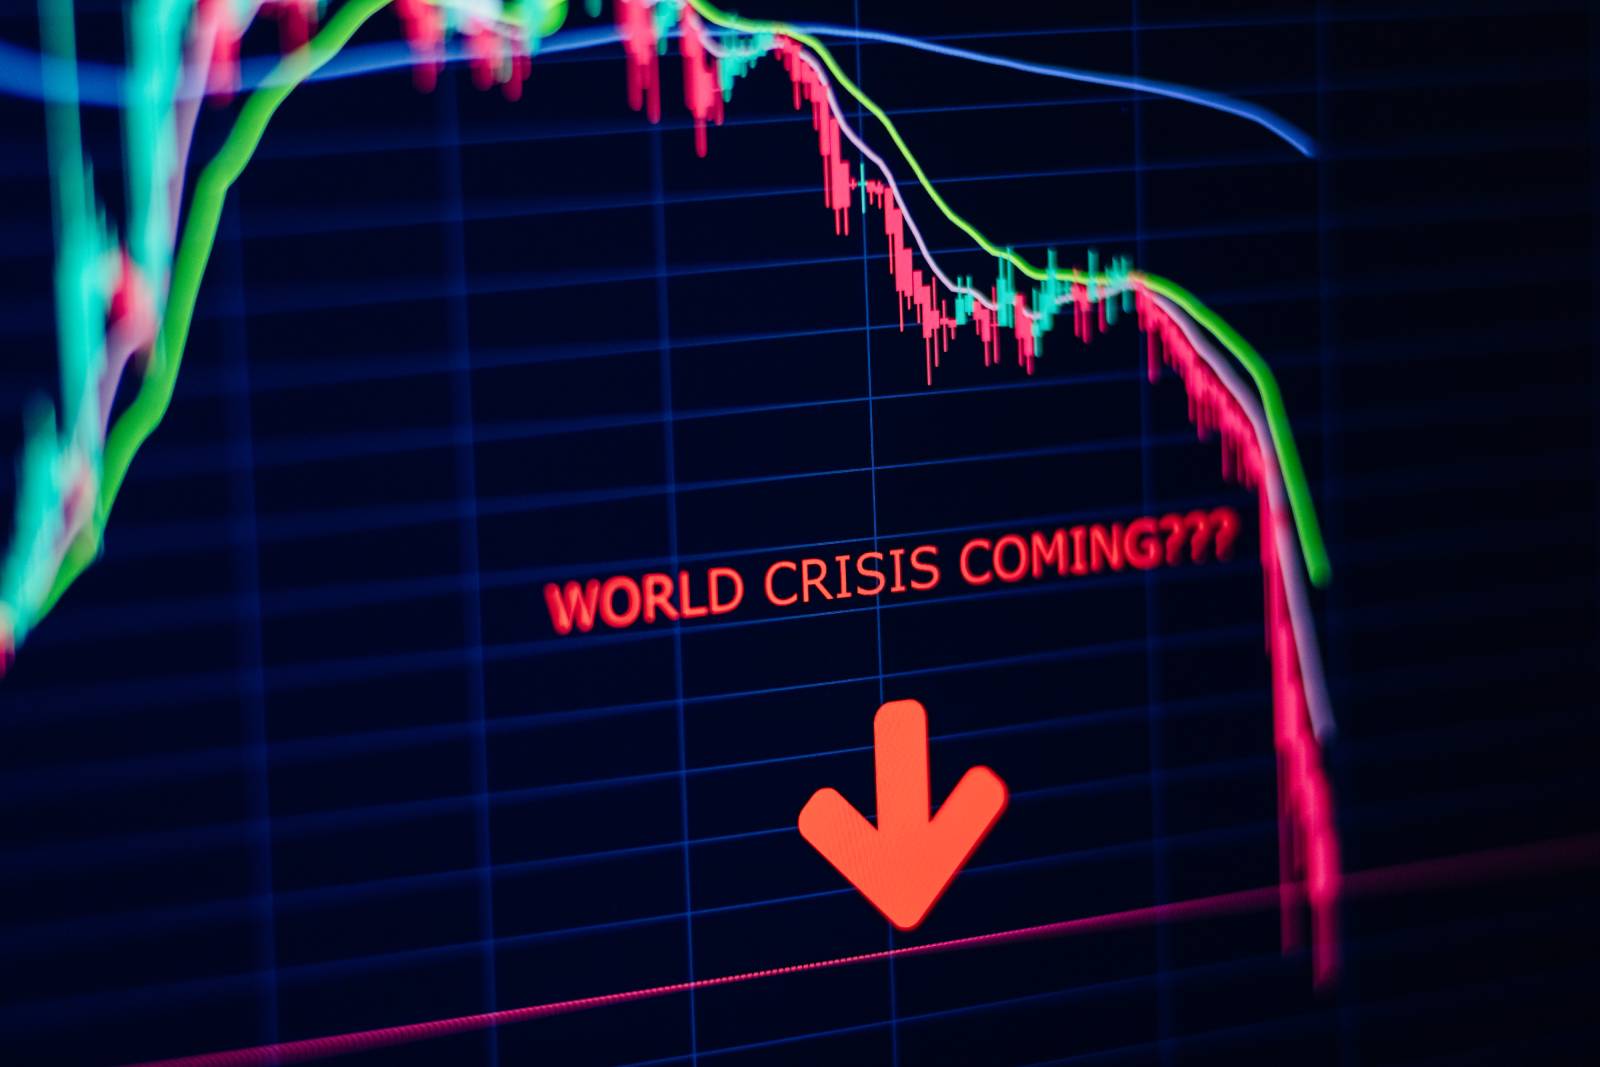 Is Indian Stock Market Going To Crash In 2020 : Is The Stock Market Going To Crash Again? | Stock Market ... / Little did i know that a virus would sweep the world and forever change.